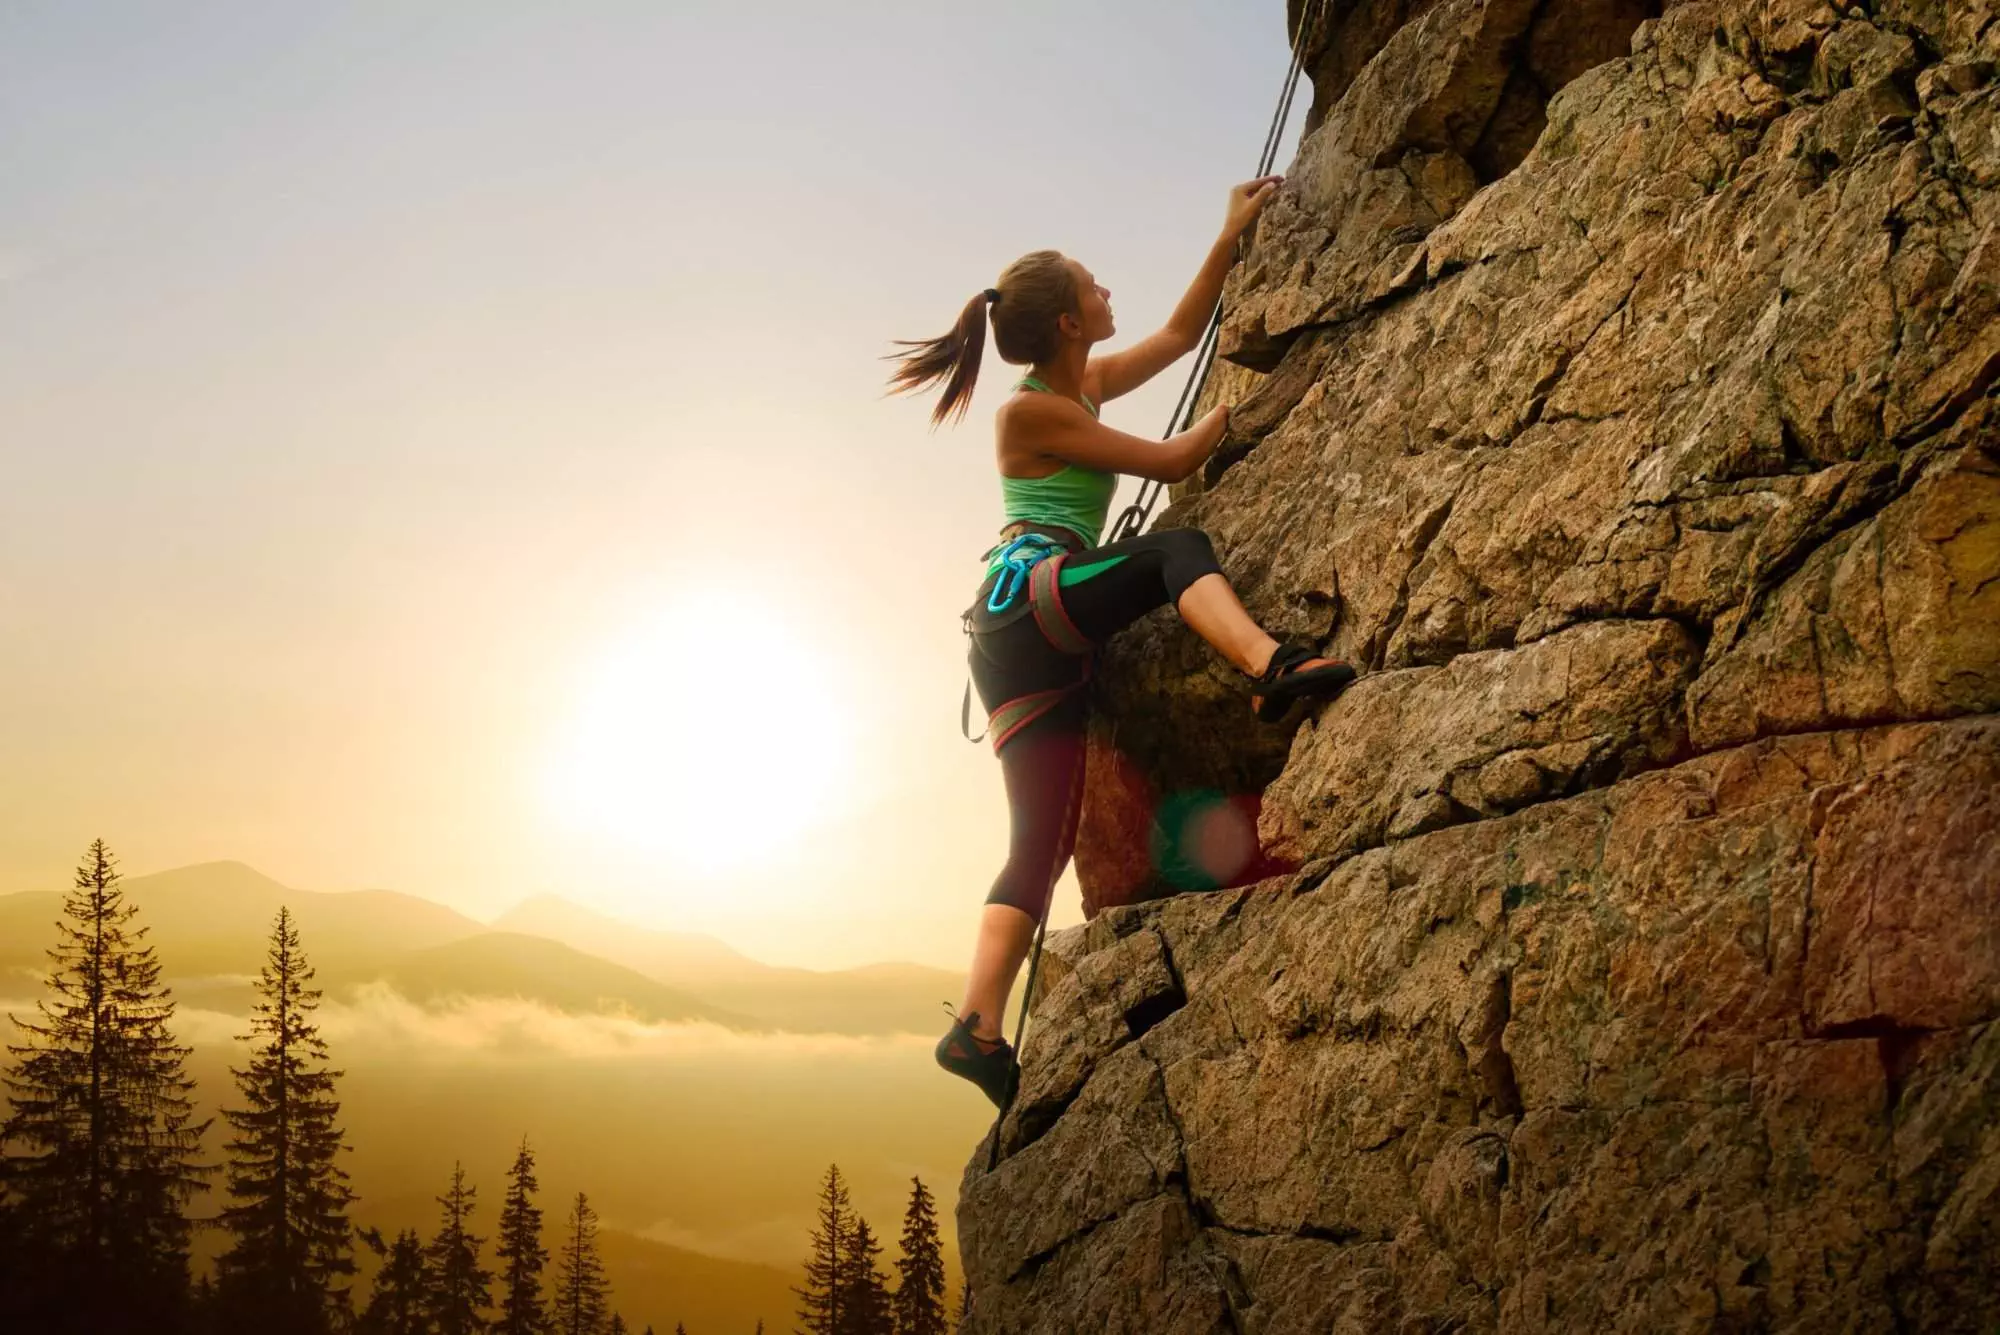 Ultimate Rock Climbing Guide - 10 Great Tips! 5